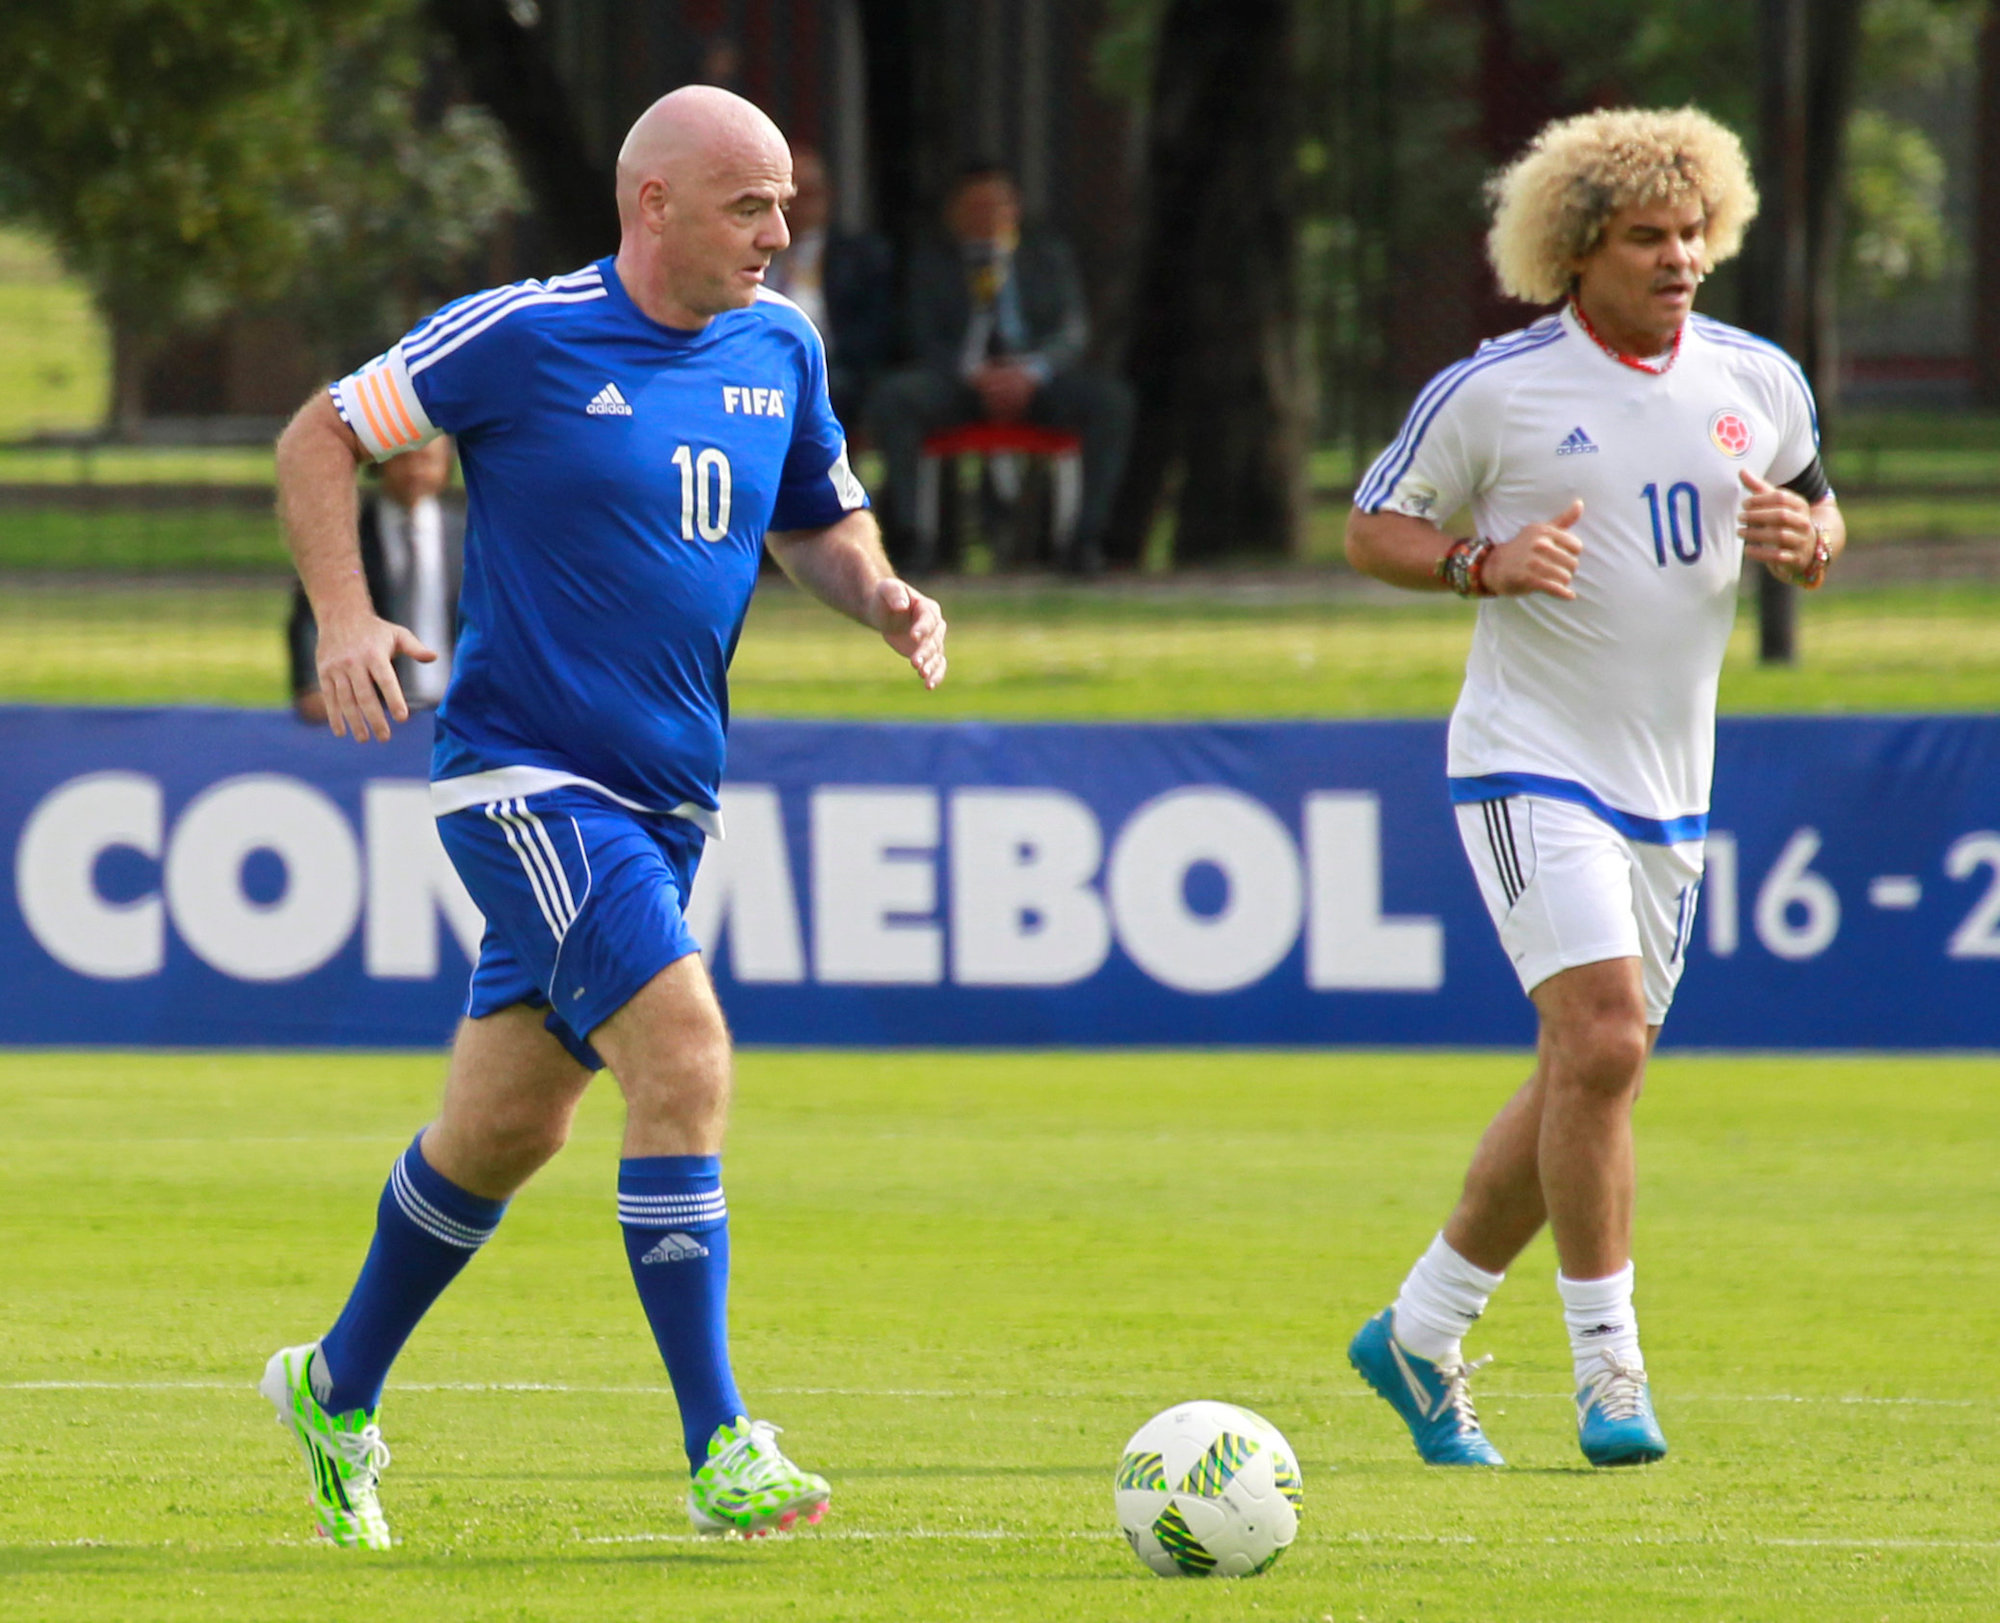 FIFA President Gianni Infantino goes for the ball next to Colombia's former soccer player Carlos Valderrama during a friendly soccer match in Bogota, Colombia, October 3, 2016. REUTERS/Felipe Caicedo FOR EDITORIAL USE ONLY. NO RESALES. NO ARCHIVES.